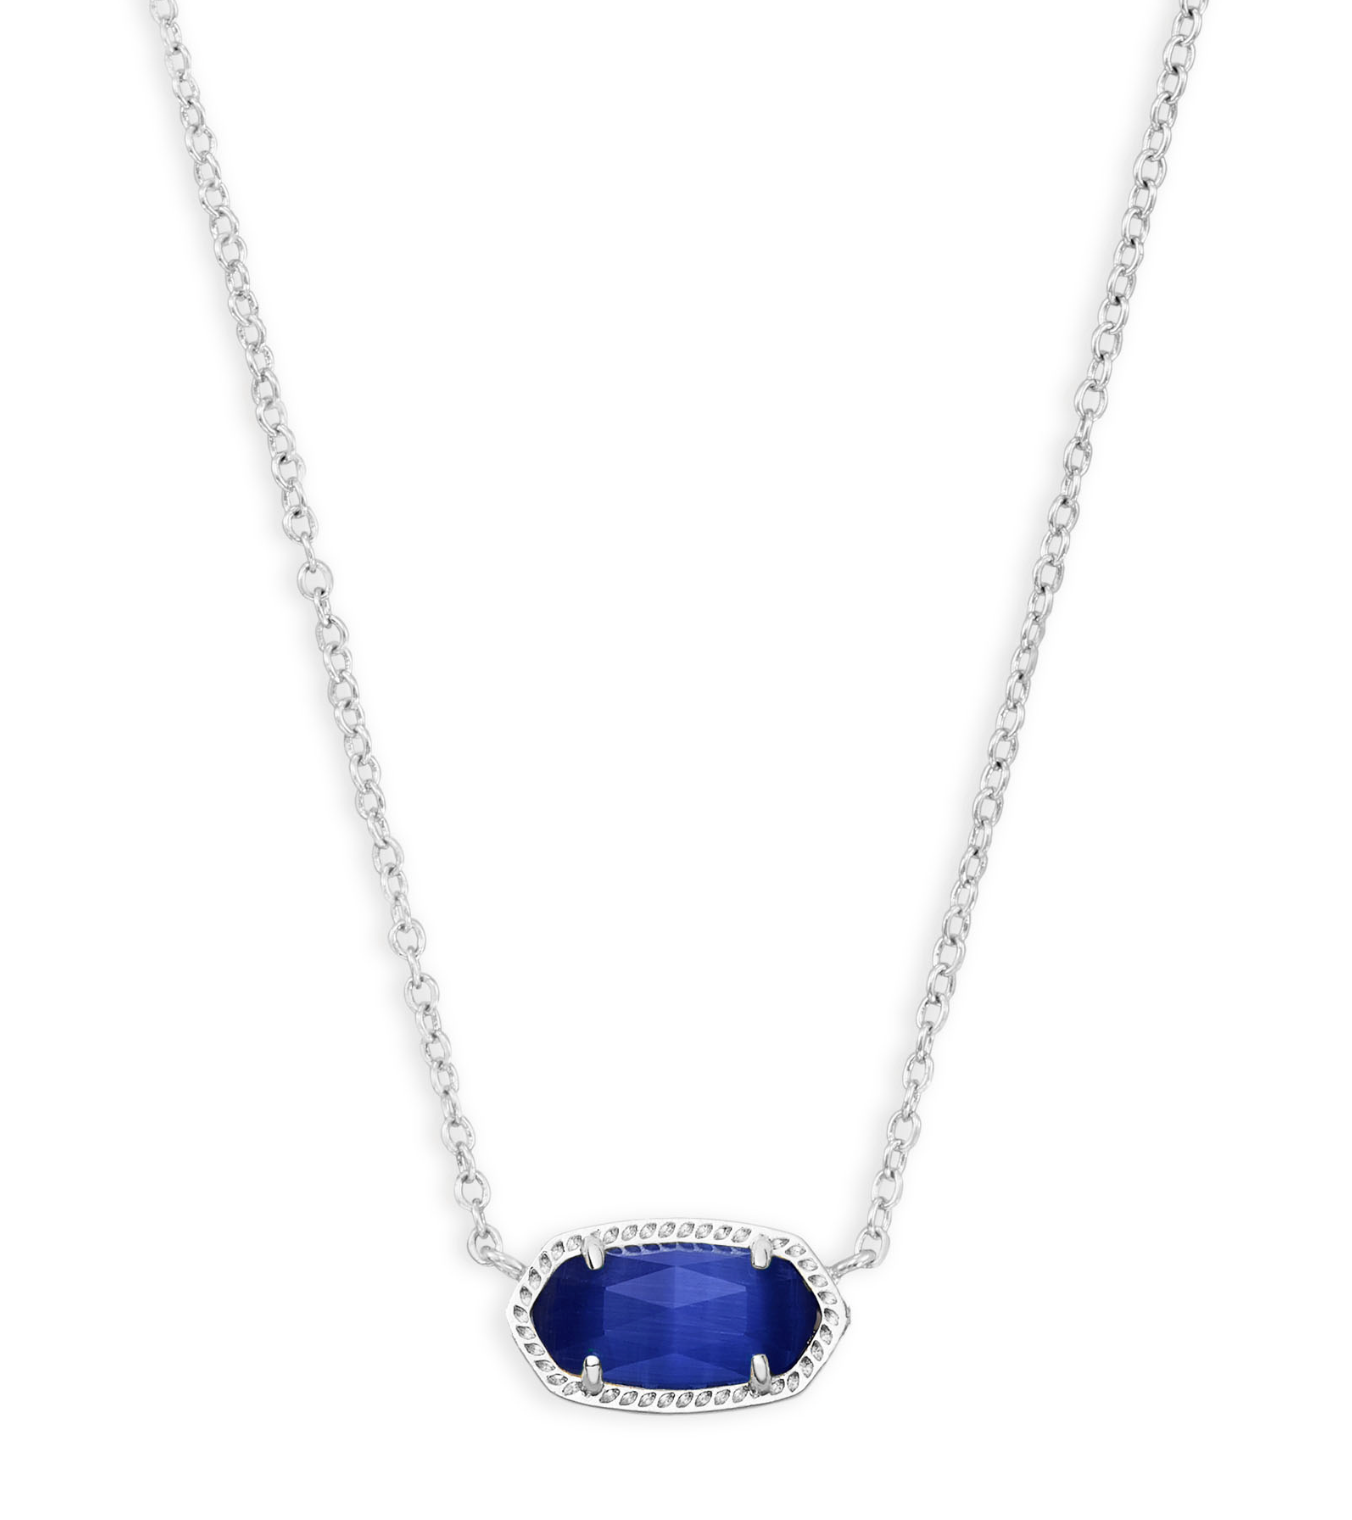 KENDRA SCOTT Elisa Silver Pendant Necklace in Cobalt Cats Eye - The Street Boutique 